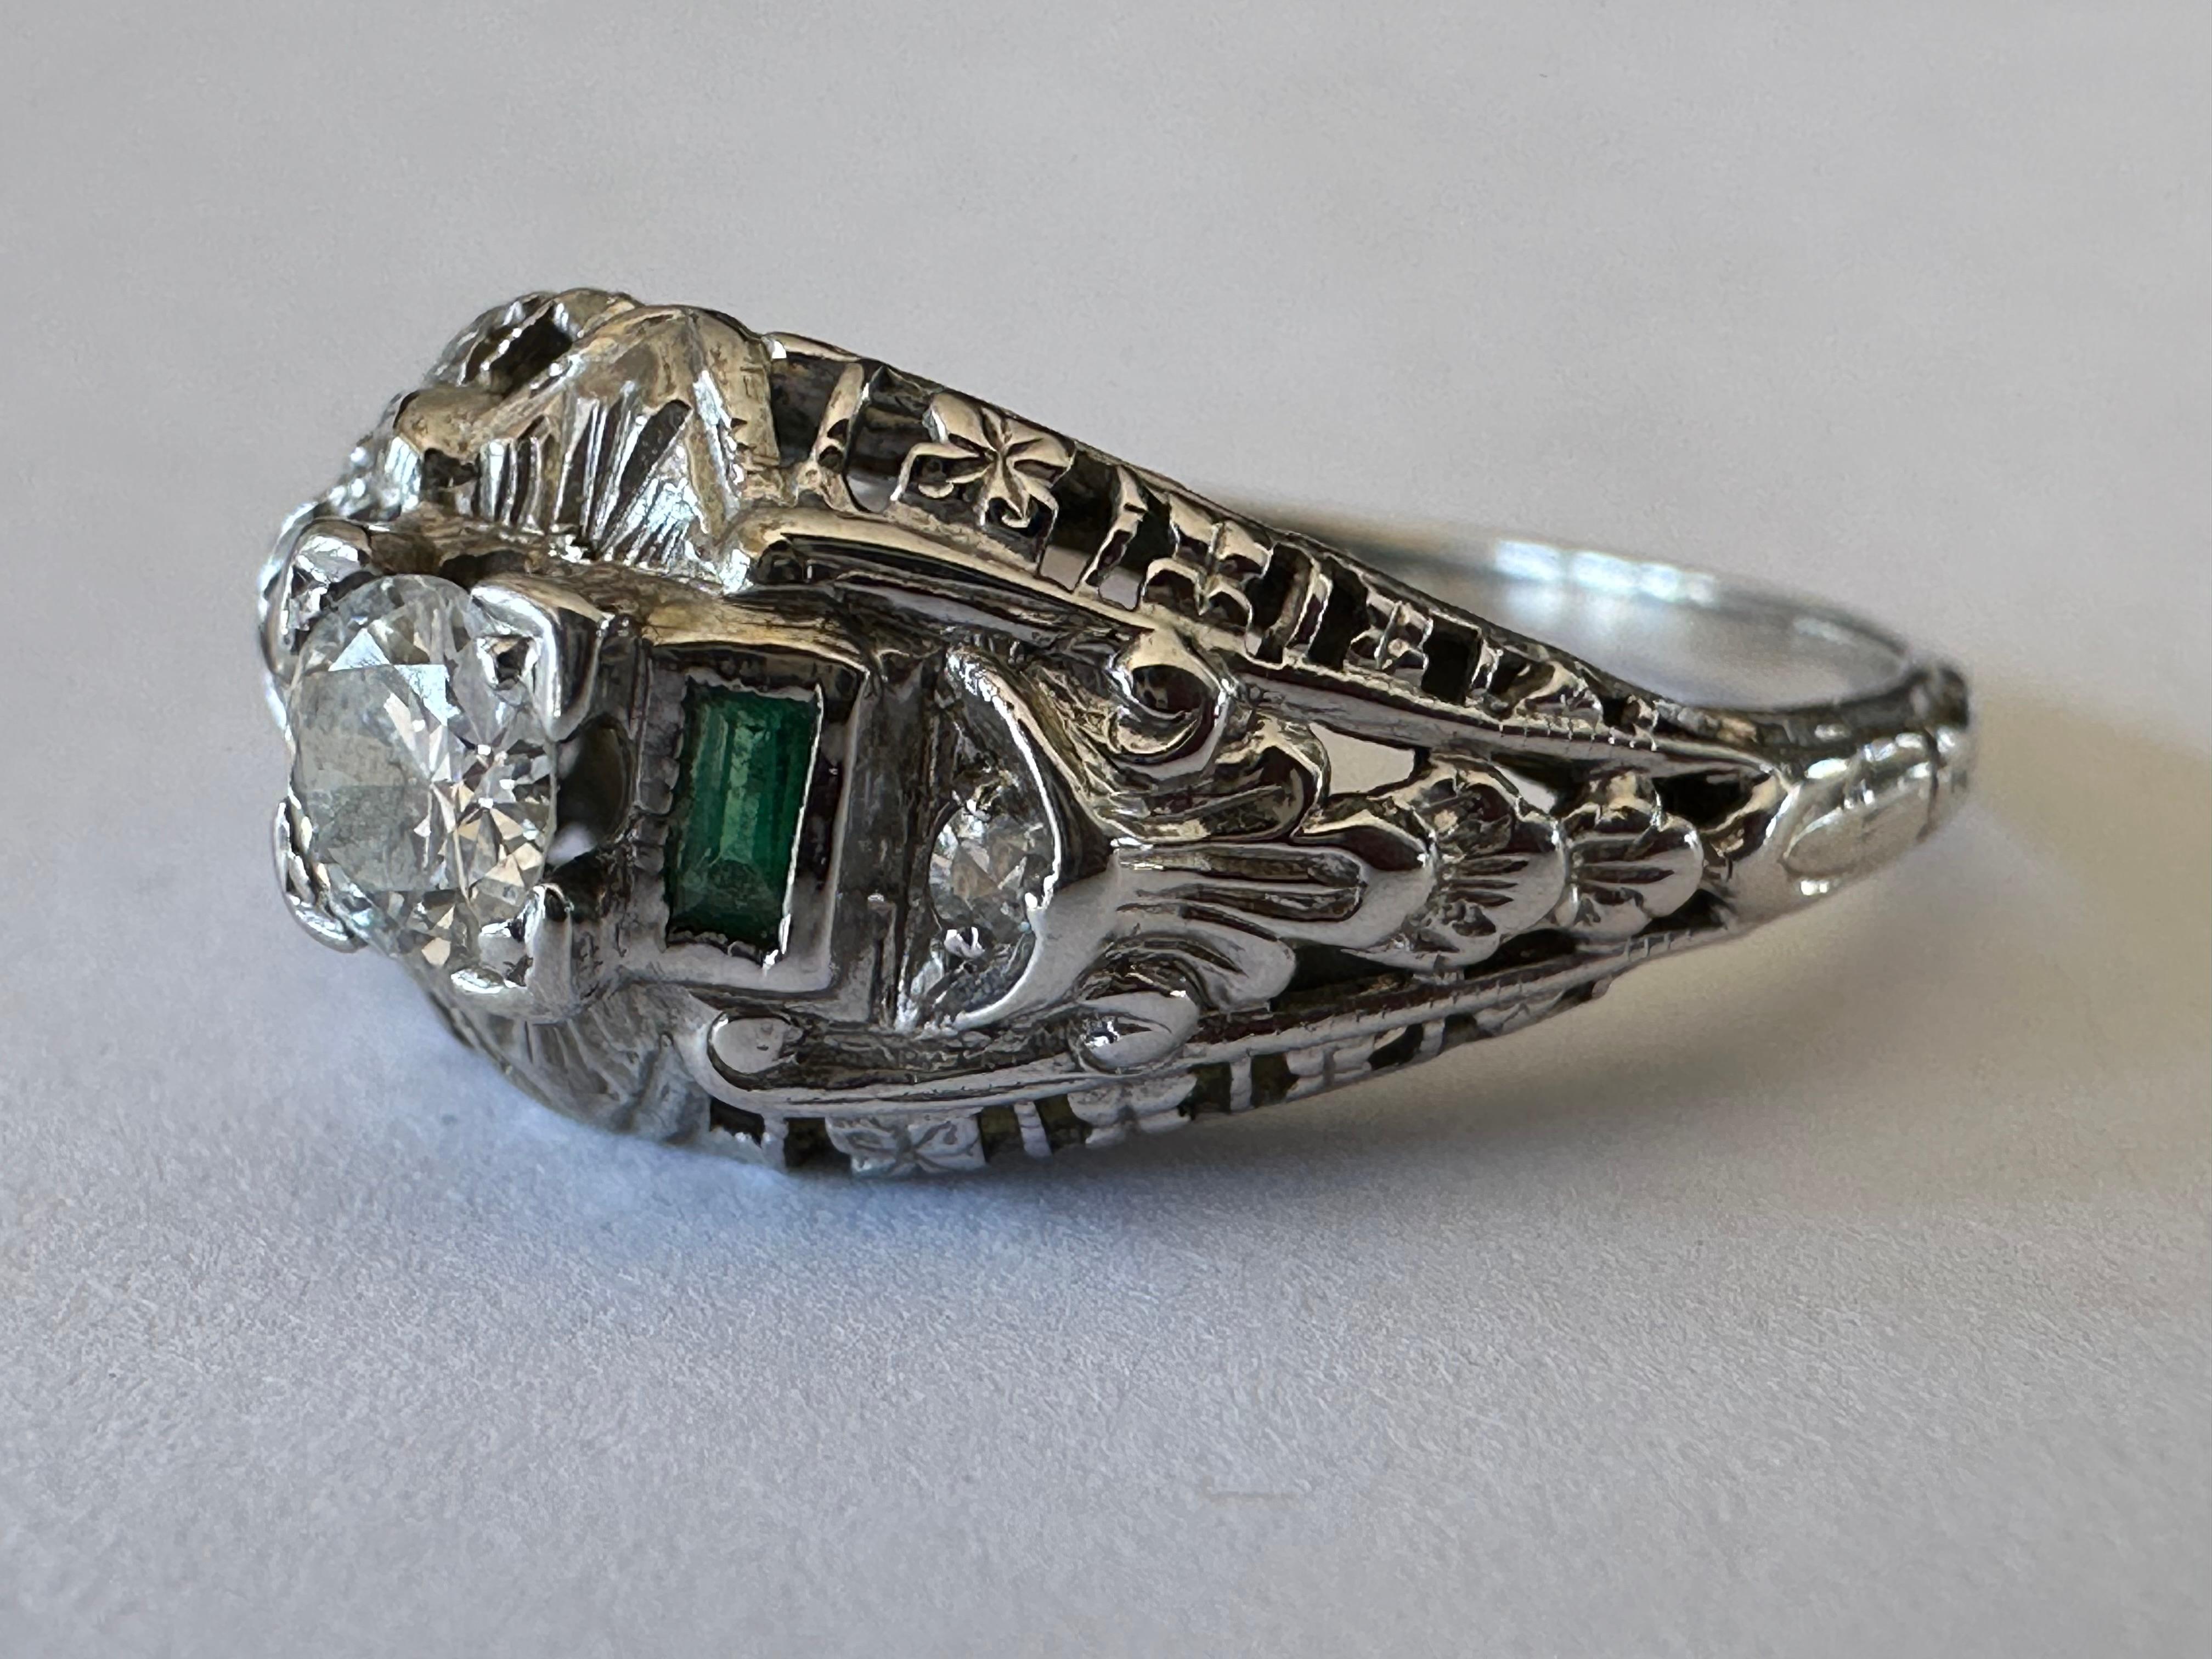 Crafted in 18K white gold, a fully-engraved shank and intricate piercing create a fanciful mounting for a shimmering Old European cut diamond center stone measuring approximately 0.20 carat, I color, VS clarity, complemented with two green Columbian